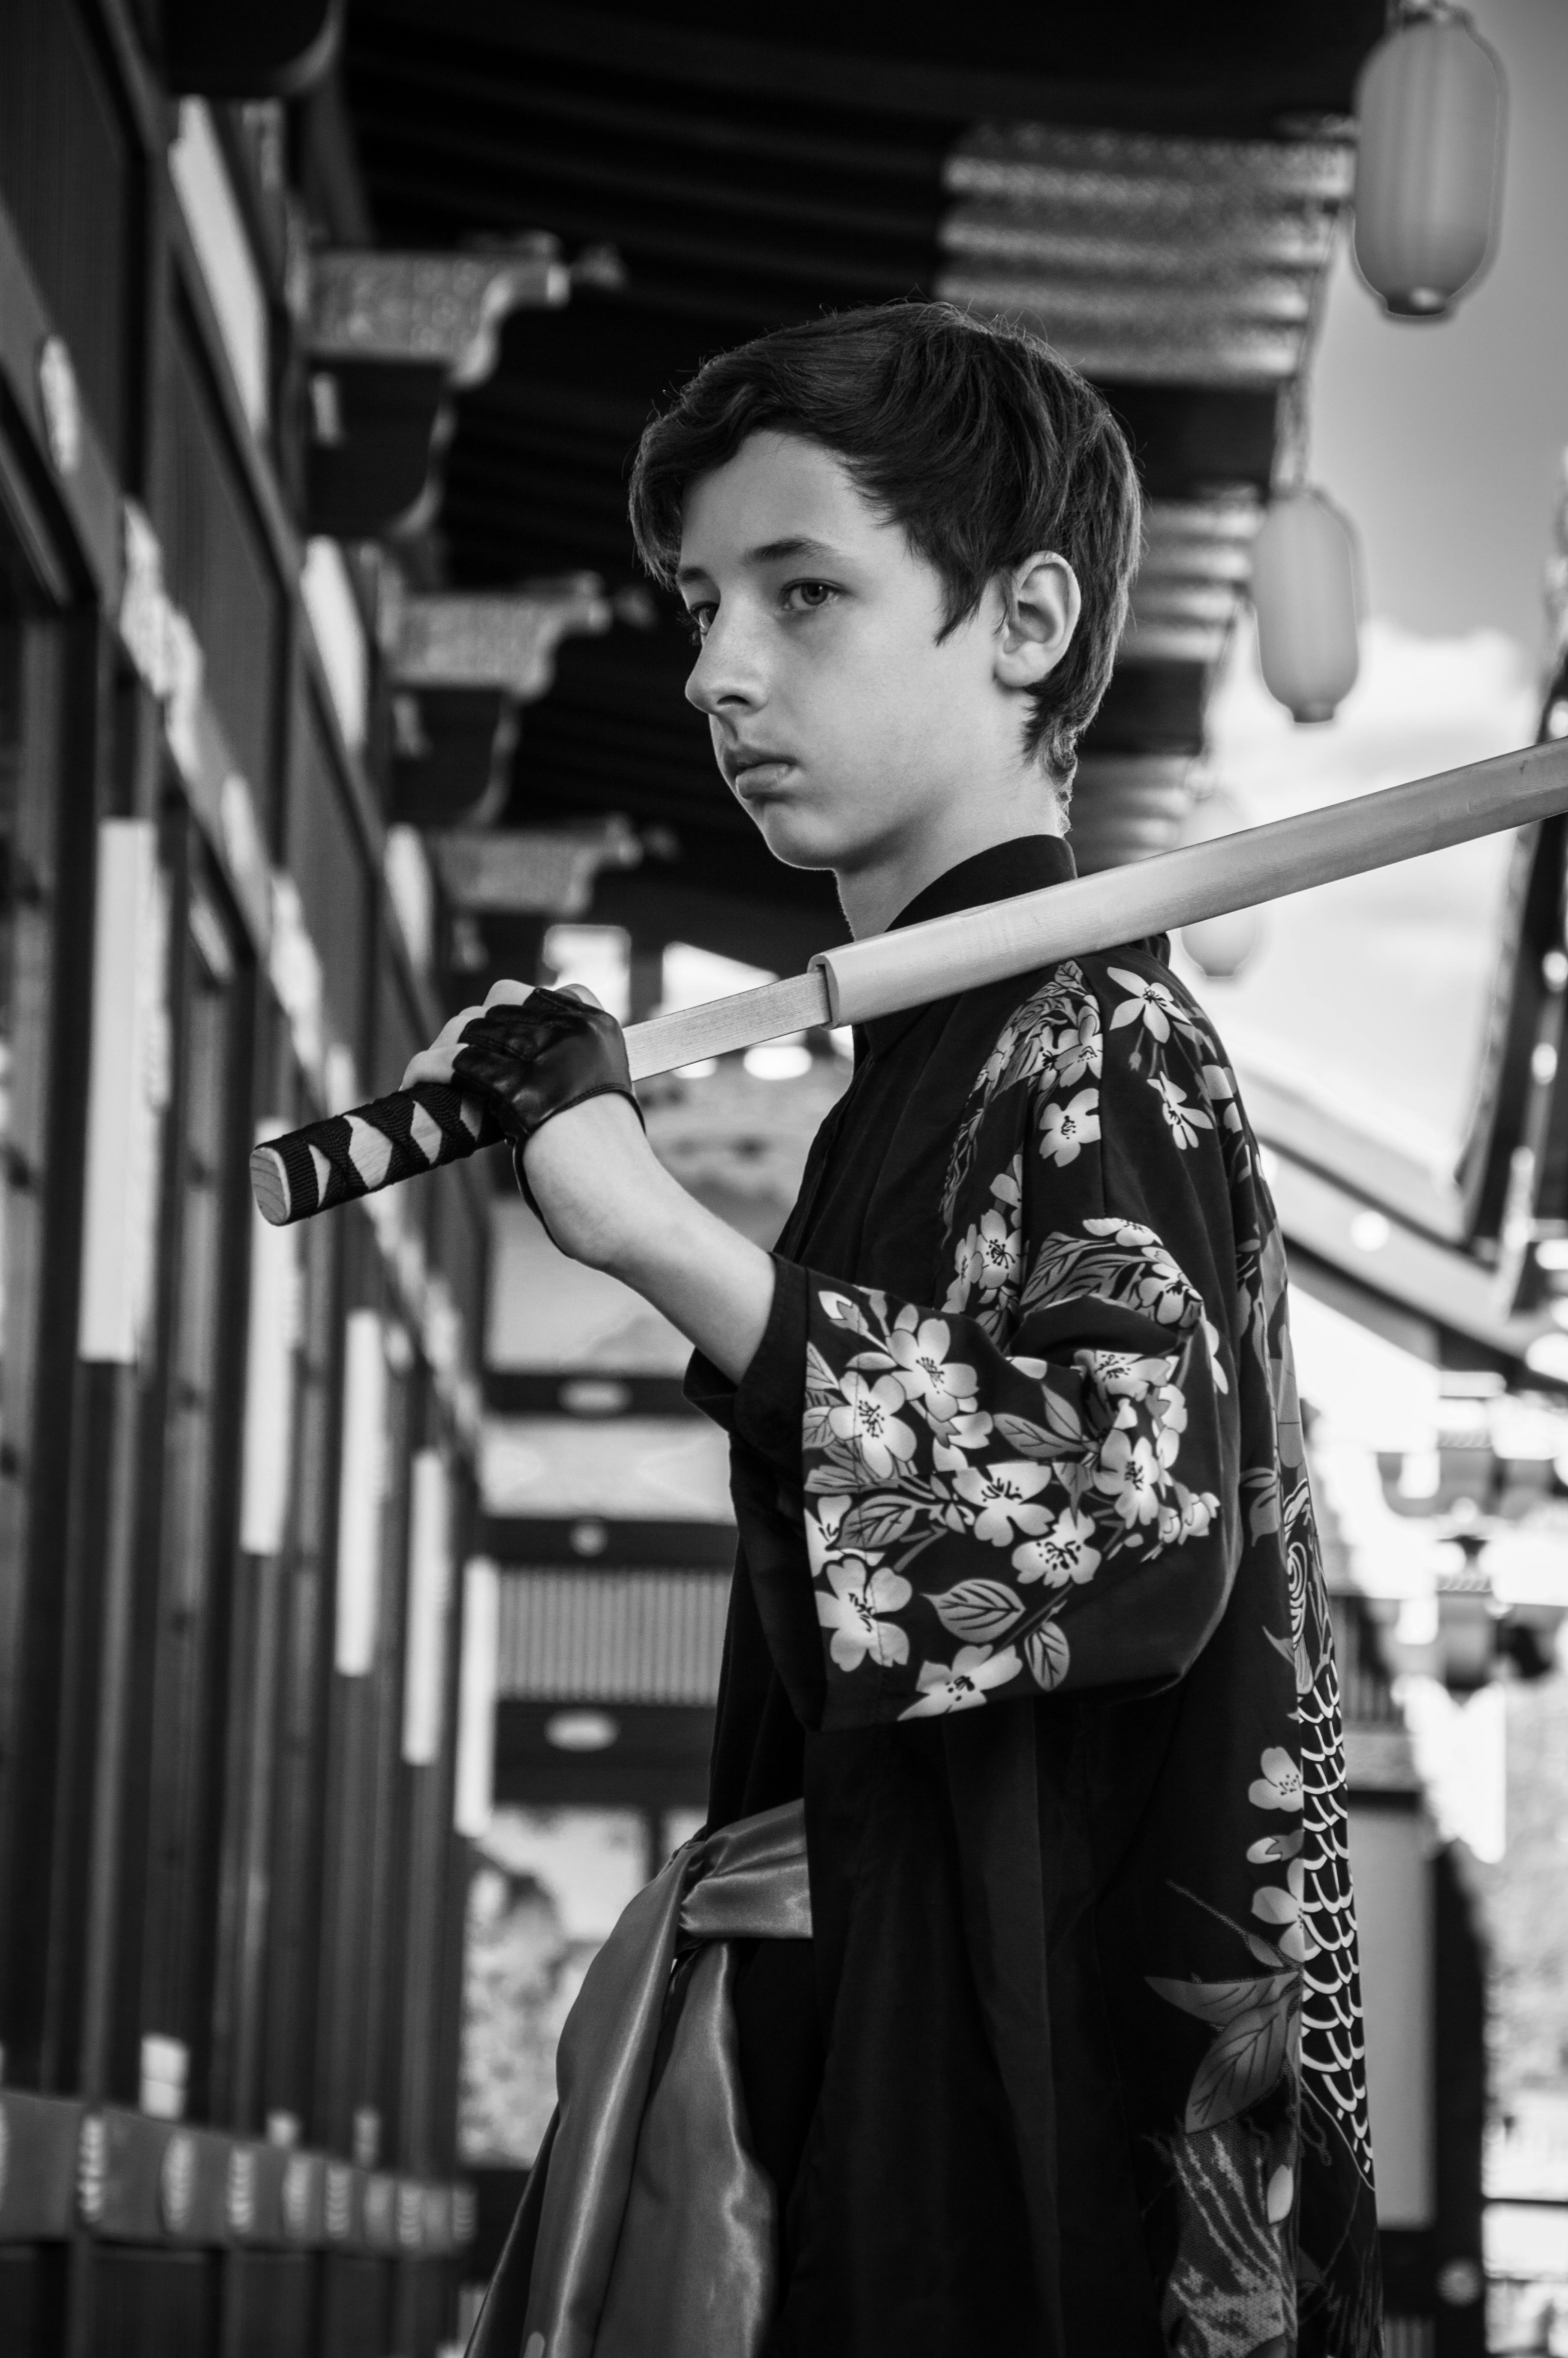 Boy in Traditional Japanese Clothing Holding Swords · Free Stock Photo